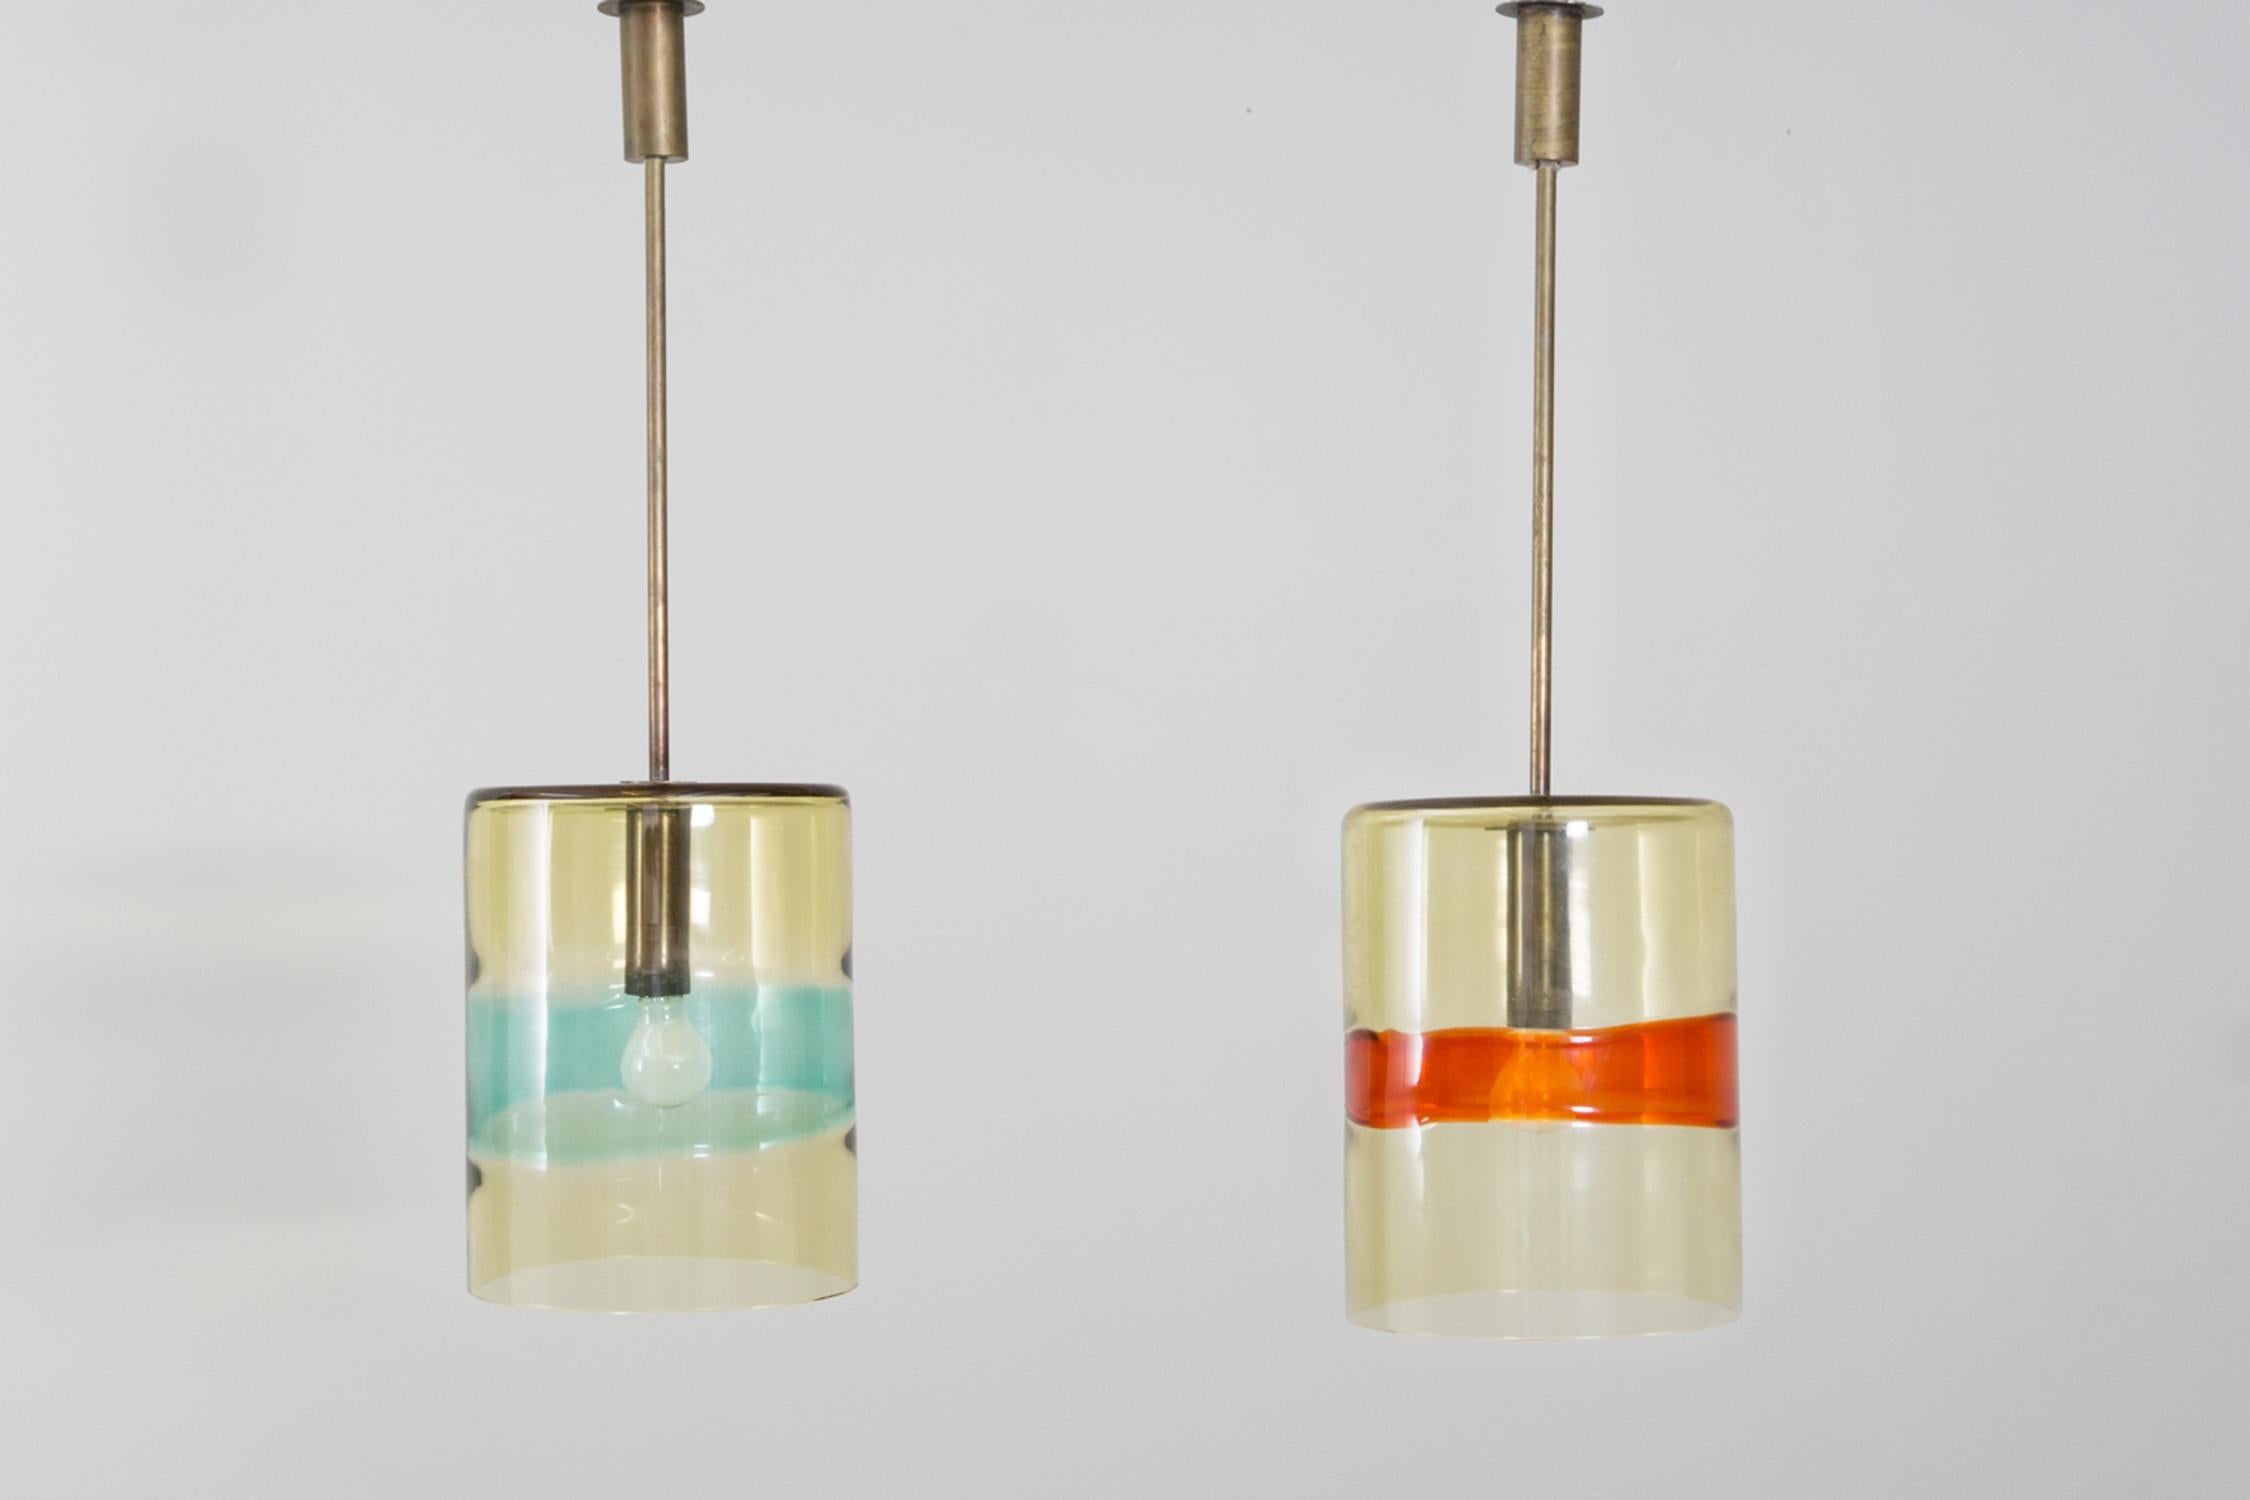 Beautiful pairs of pendants by Flavio Poli, made of hand blown glass with a light green tint and colored stripes in orange and turquoise. Brass mounting. Manufactured by Seguso Vetri D’Arte Murano. Originally part of the interior of Hotel Royal in